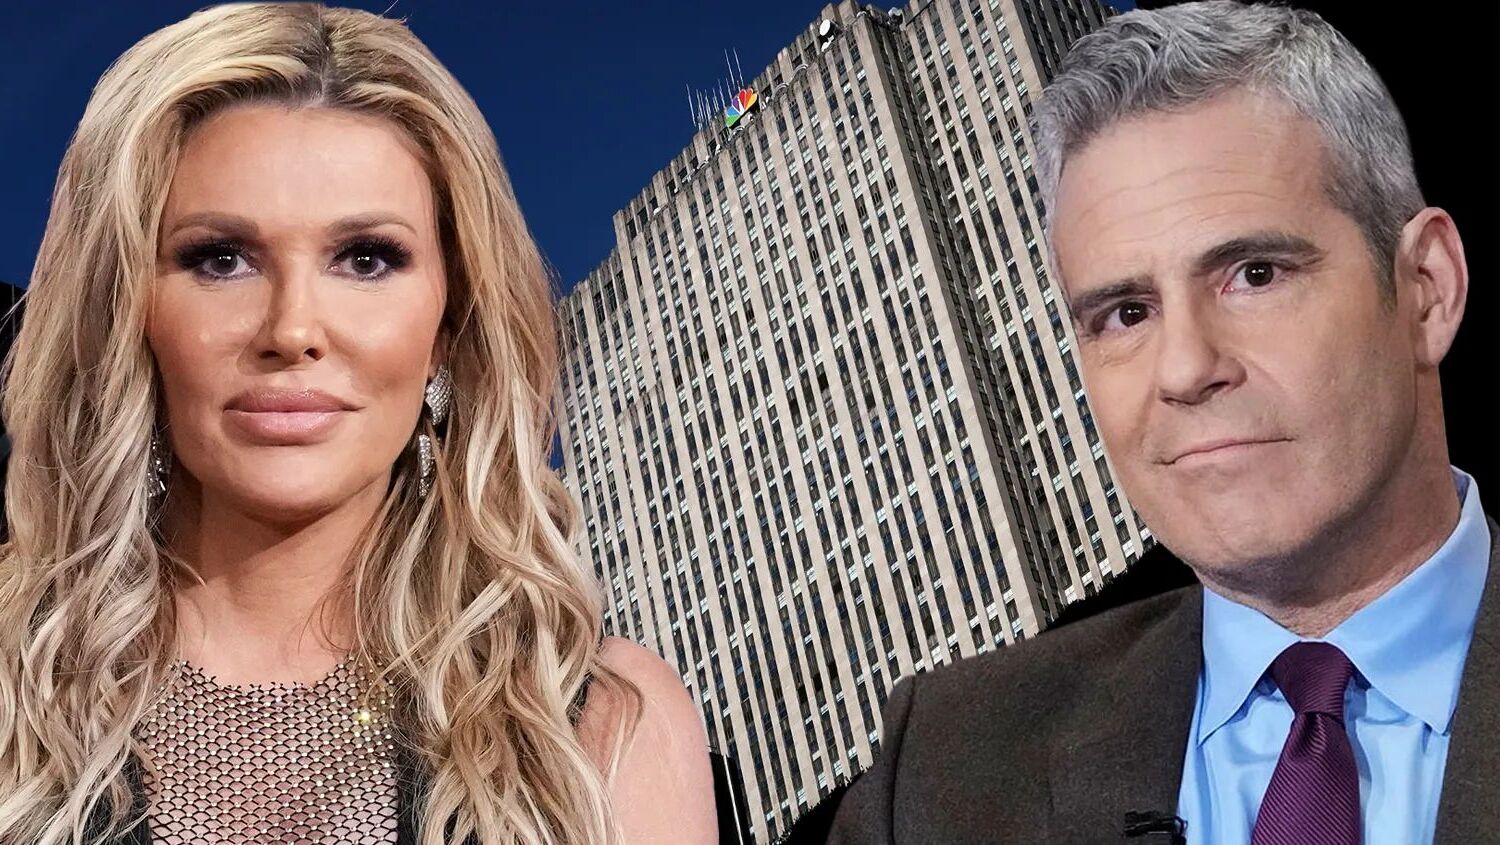 Brandi Glanville Demands Personal Apology From Andy Cohen